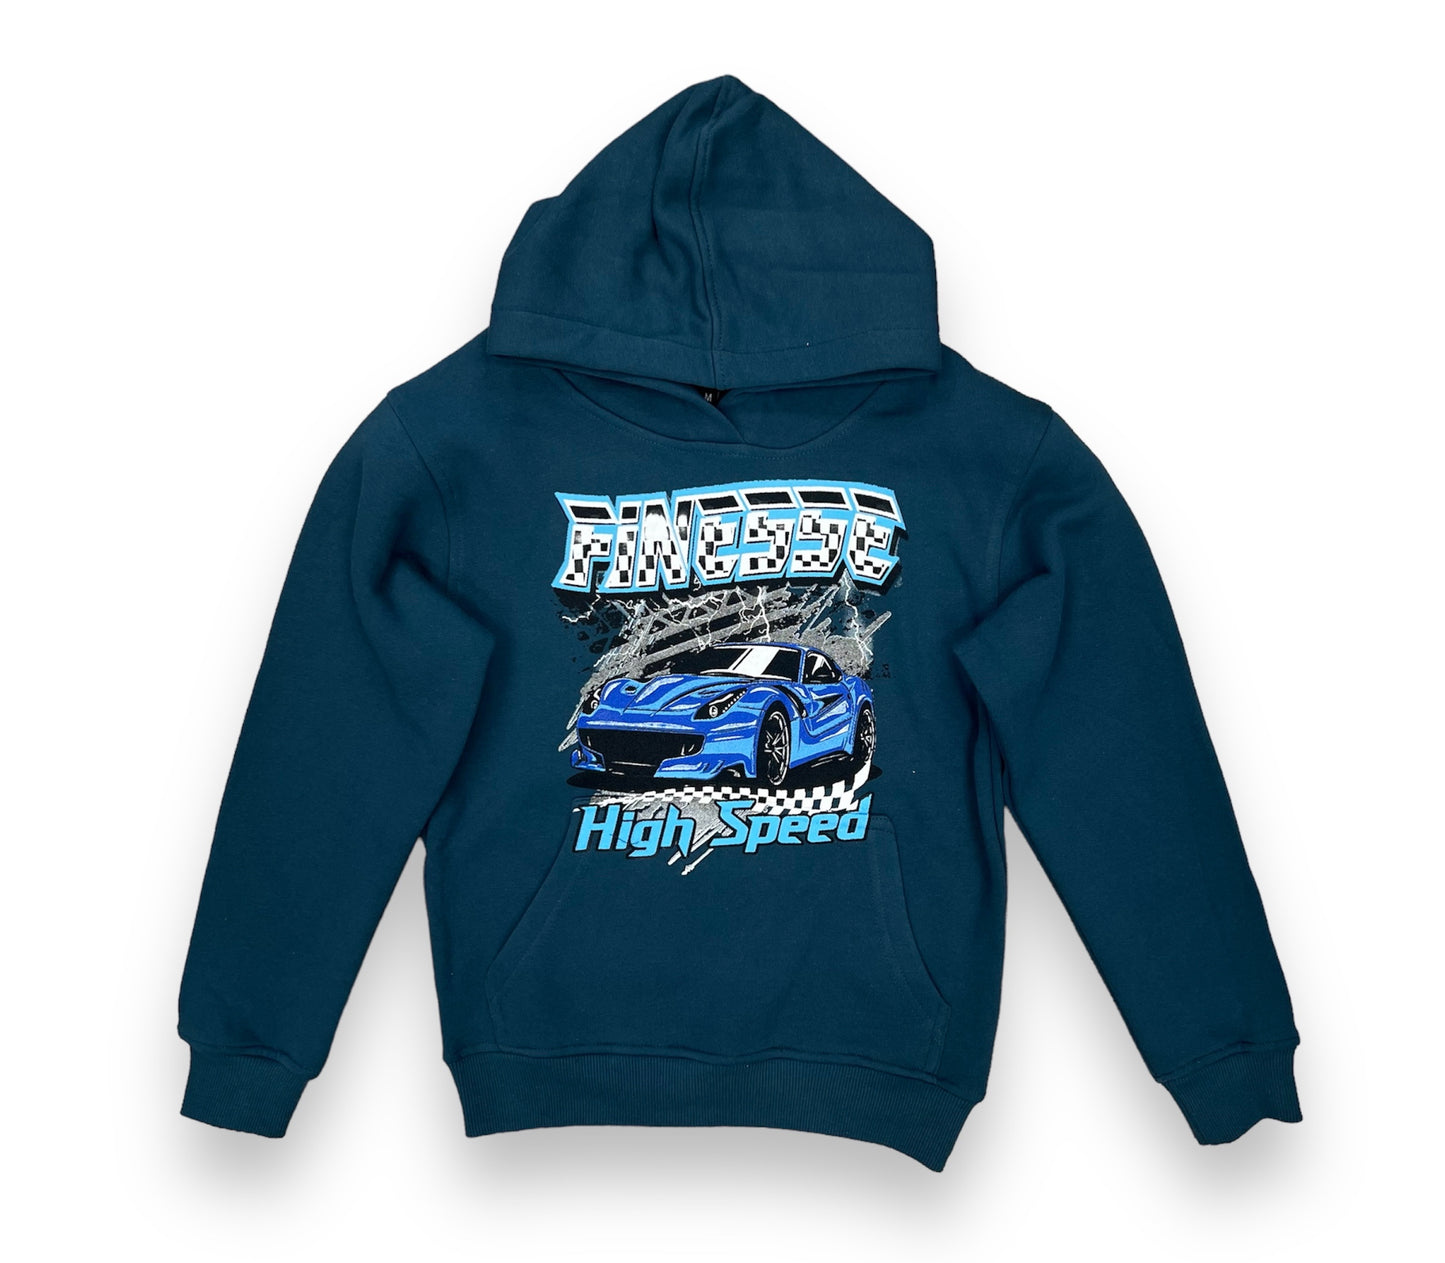 3FORTY HIGH SPEED TEAL BOY'S HOODIE